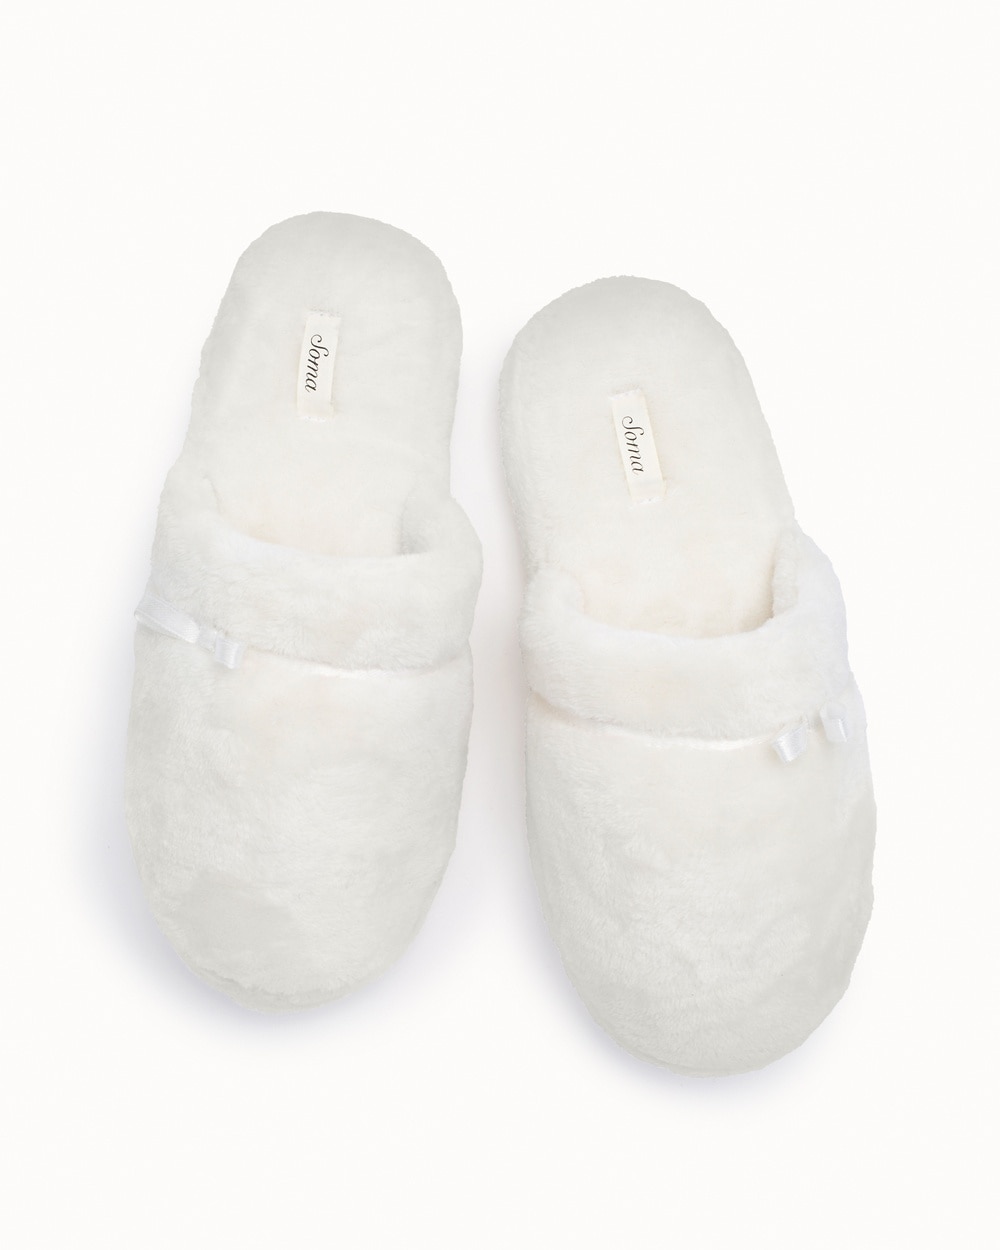 Embraceable Plush Slippers Ivory